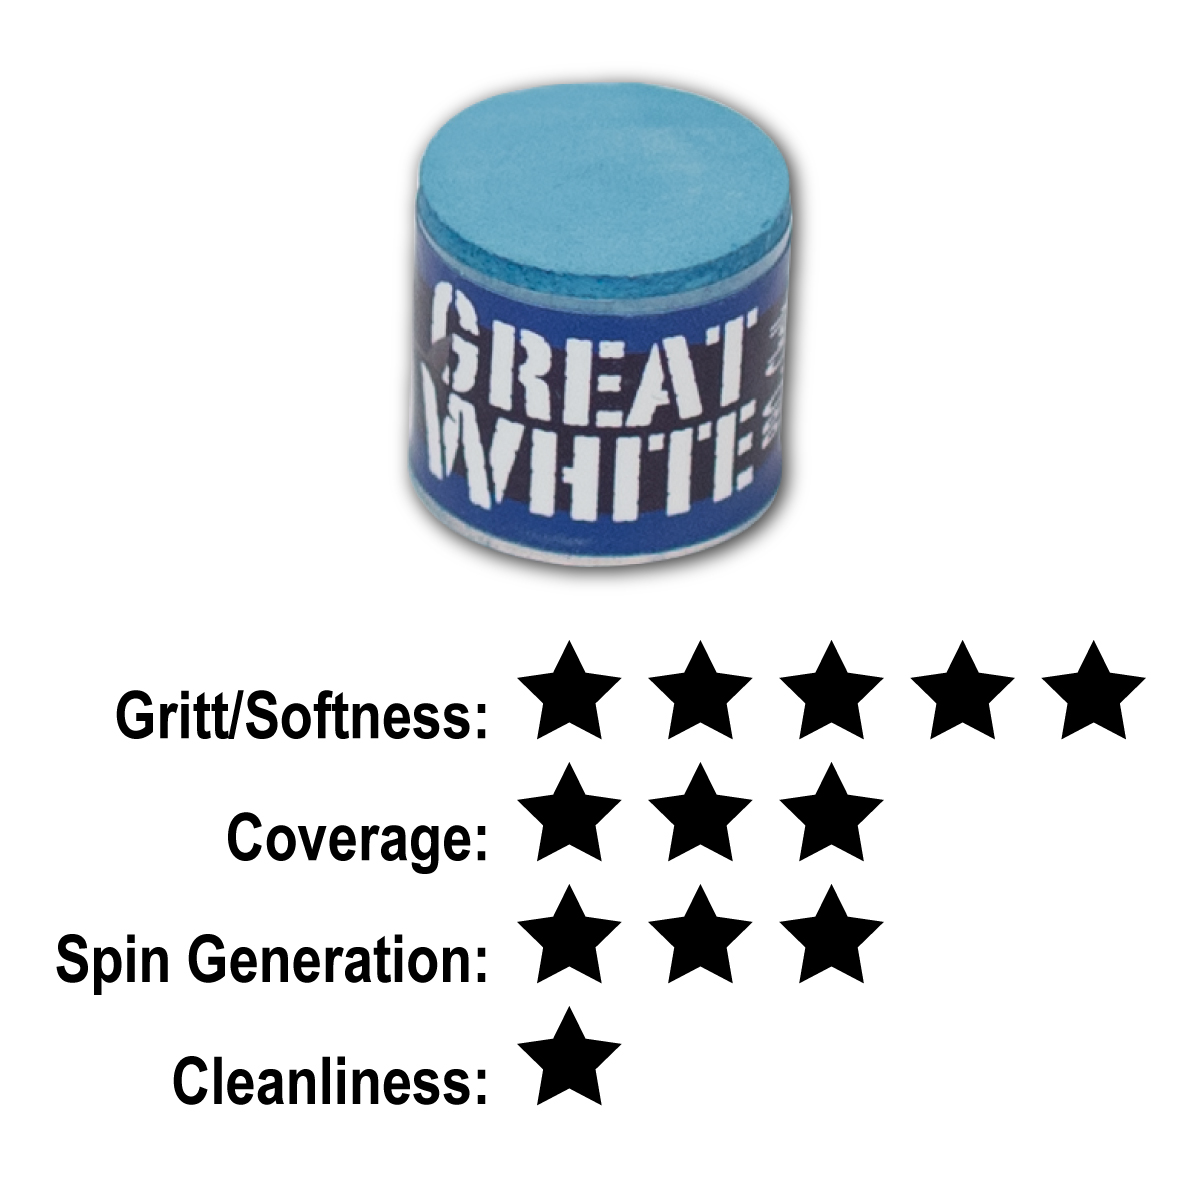 Great White Chalk Rating